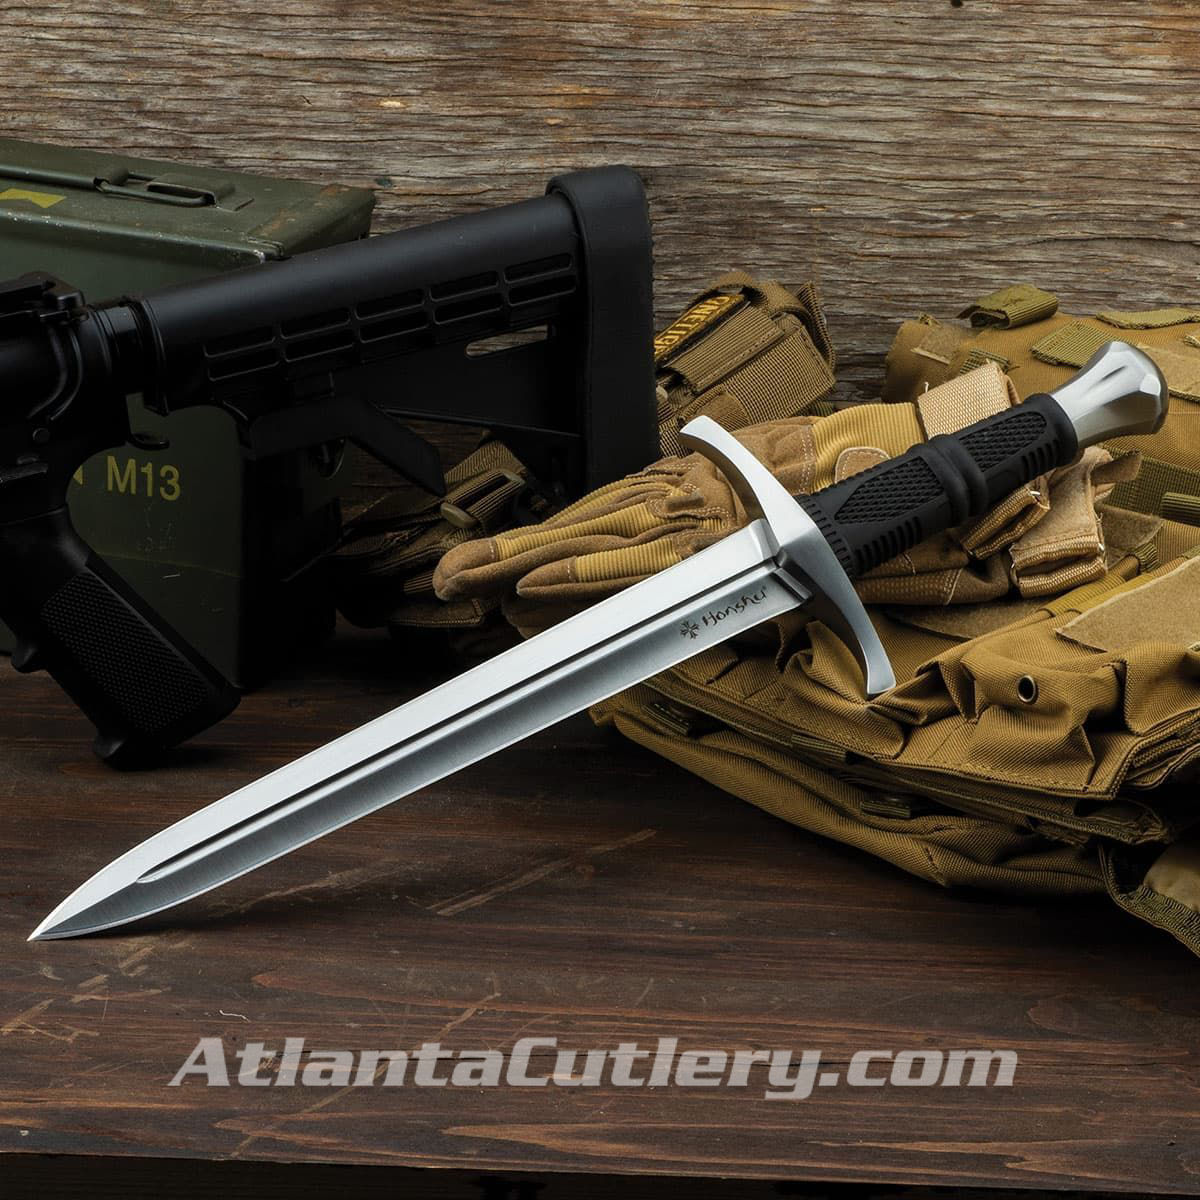 Honshu Crusader Quillon Dagger with sharp 1060 carbon steel blade, injection-molded TPR handle, cast 2Cr13 pommel and handguard